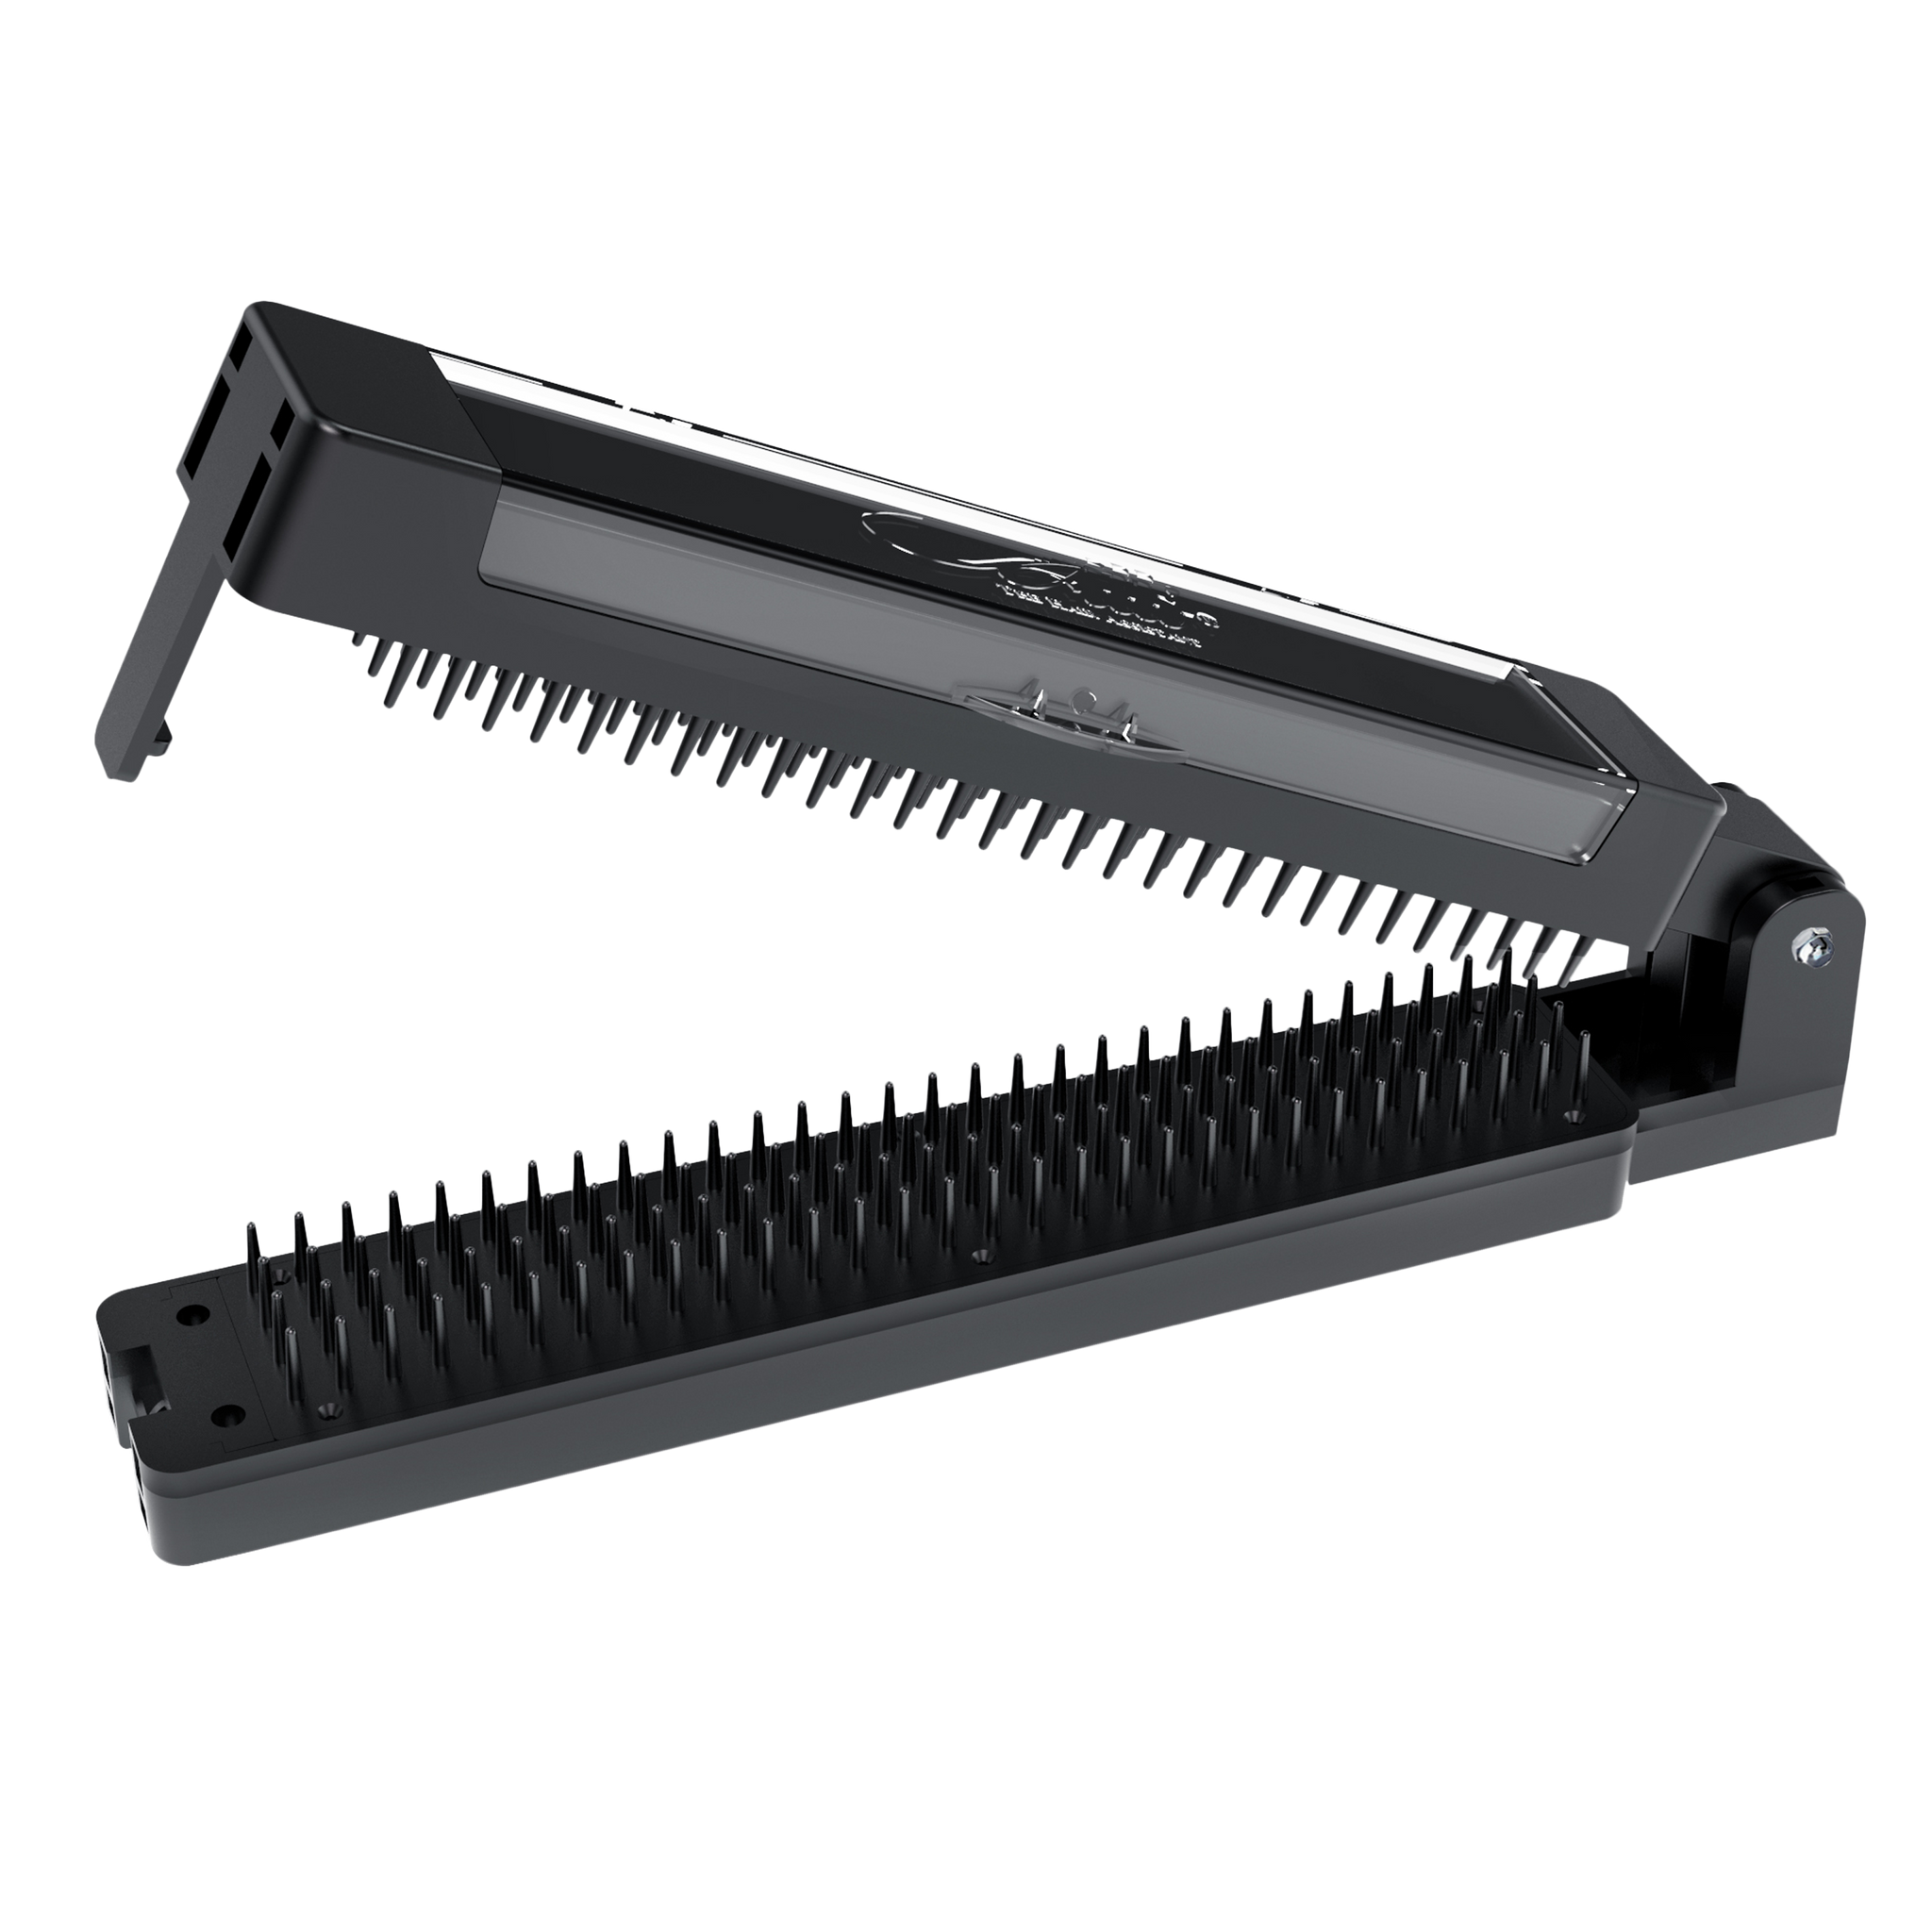 Alli Styles Assistant Professional Hair Braiding Tool - Evolving Textures